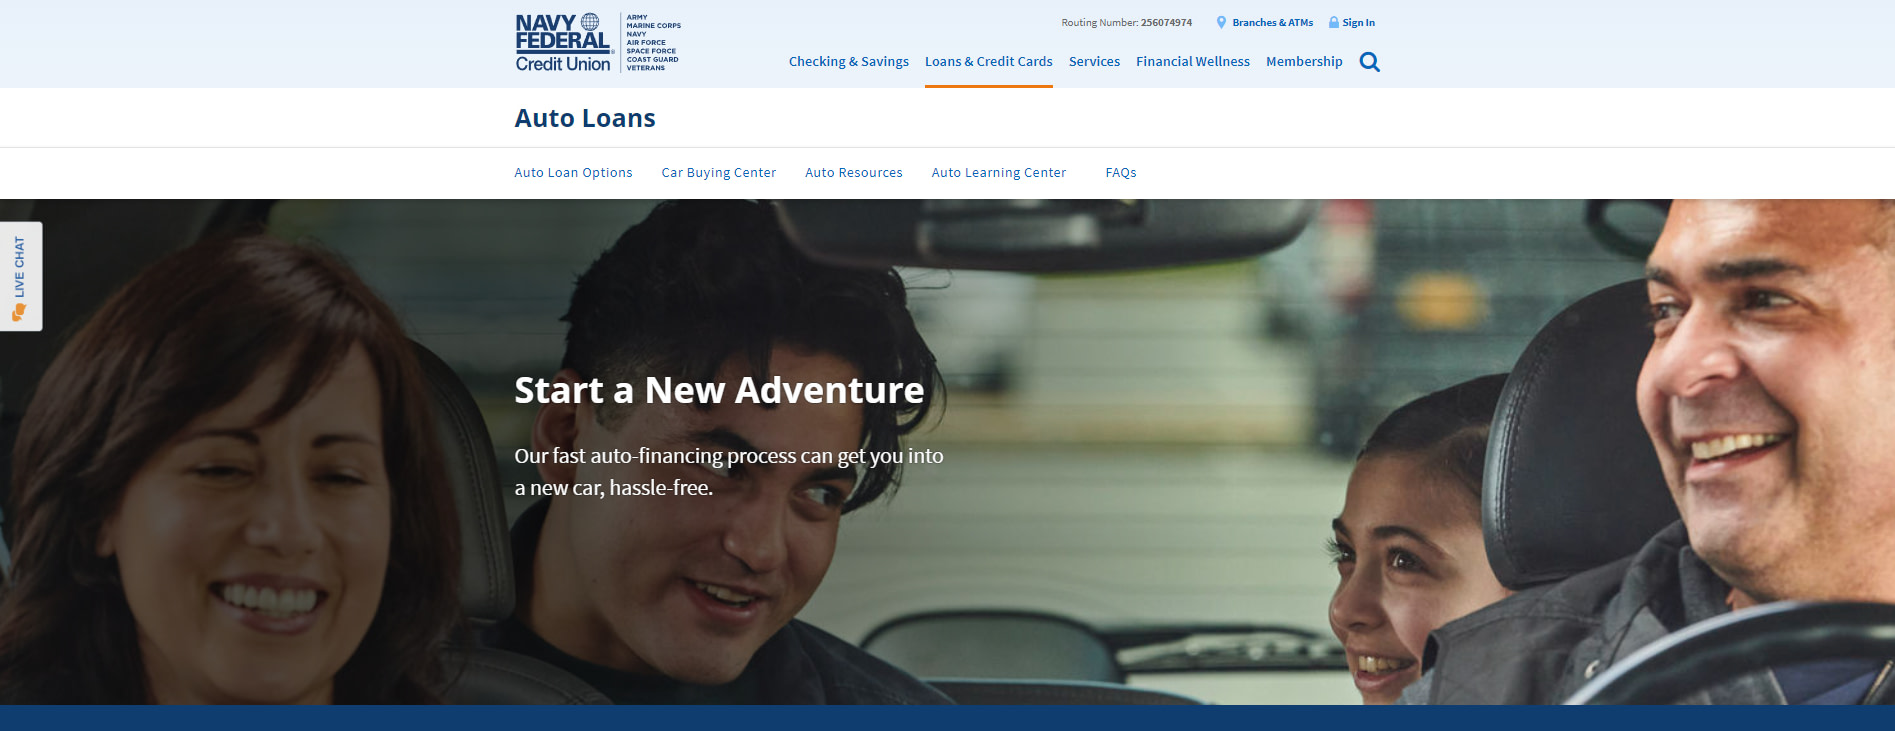 Navy Federal auto loan page